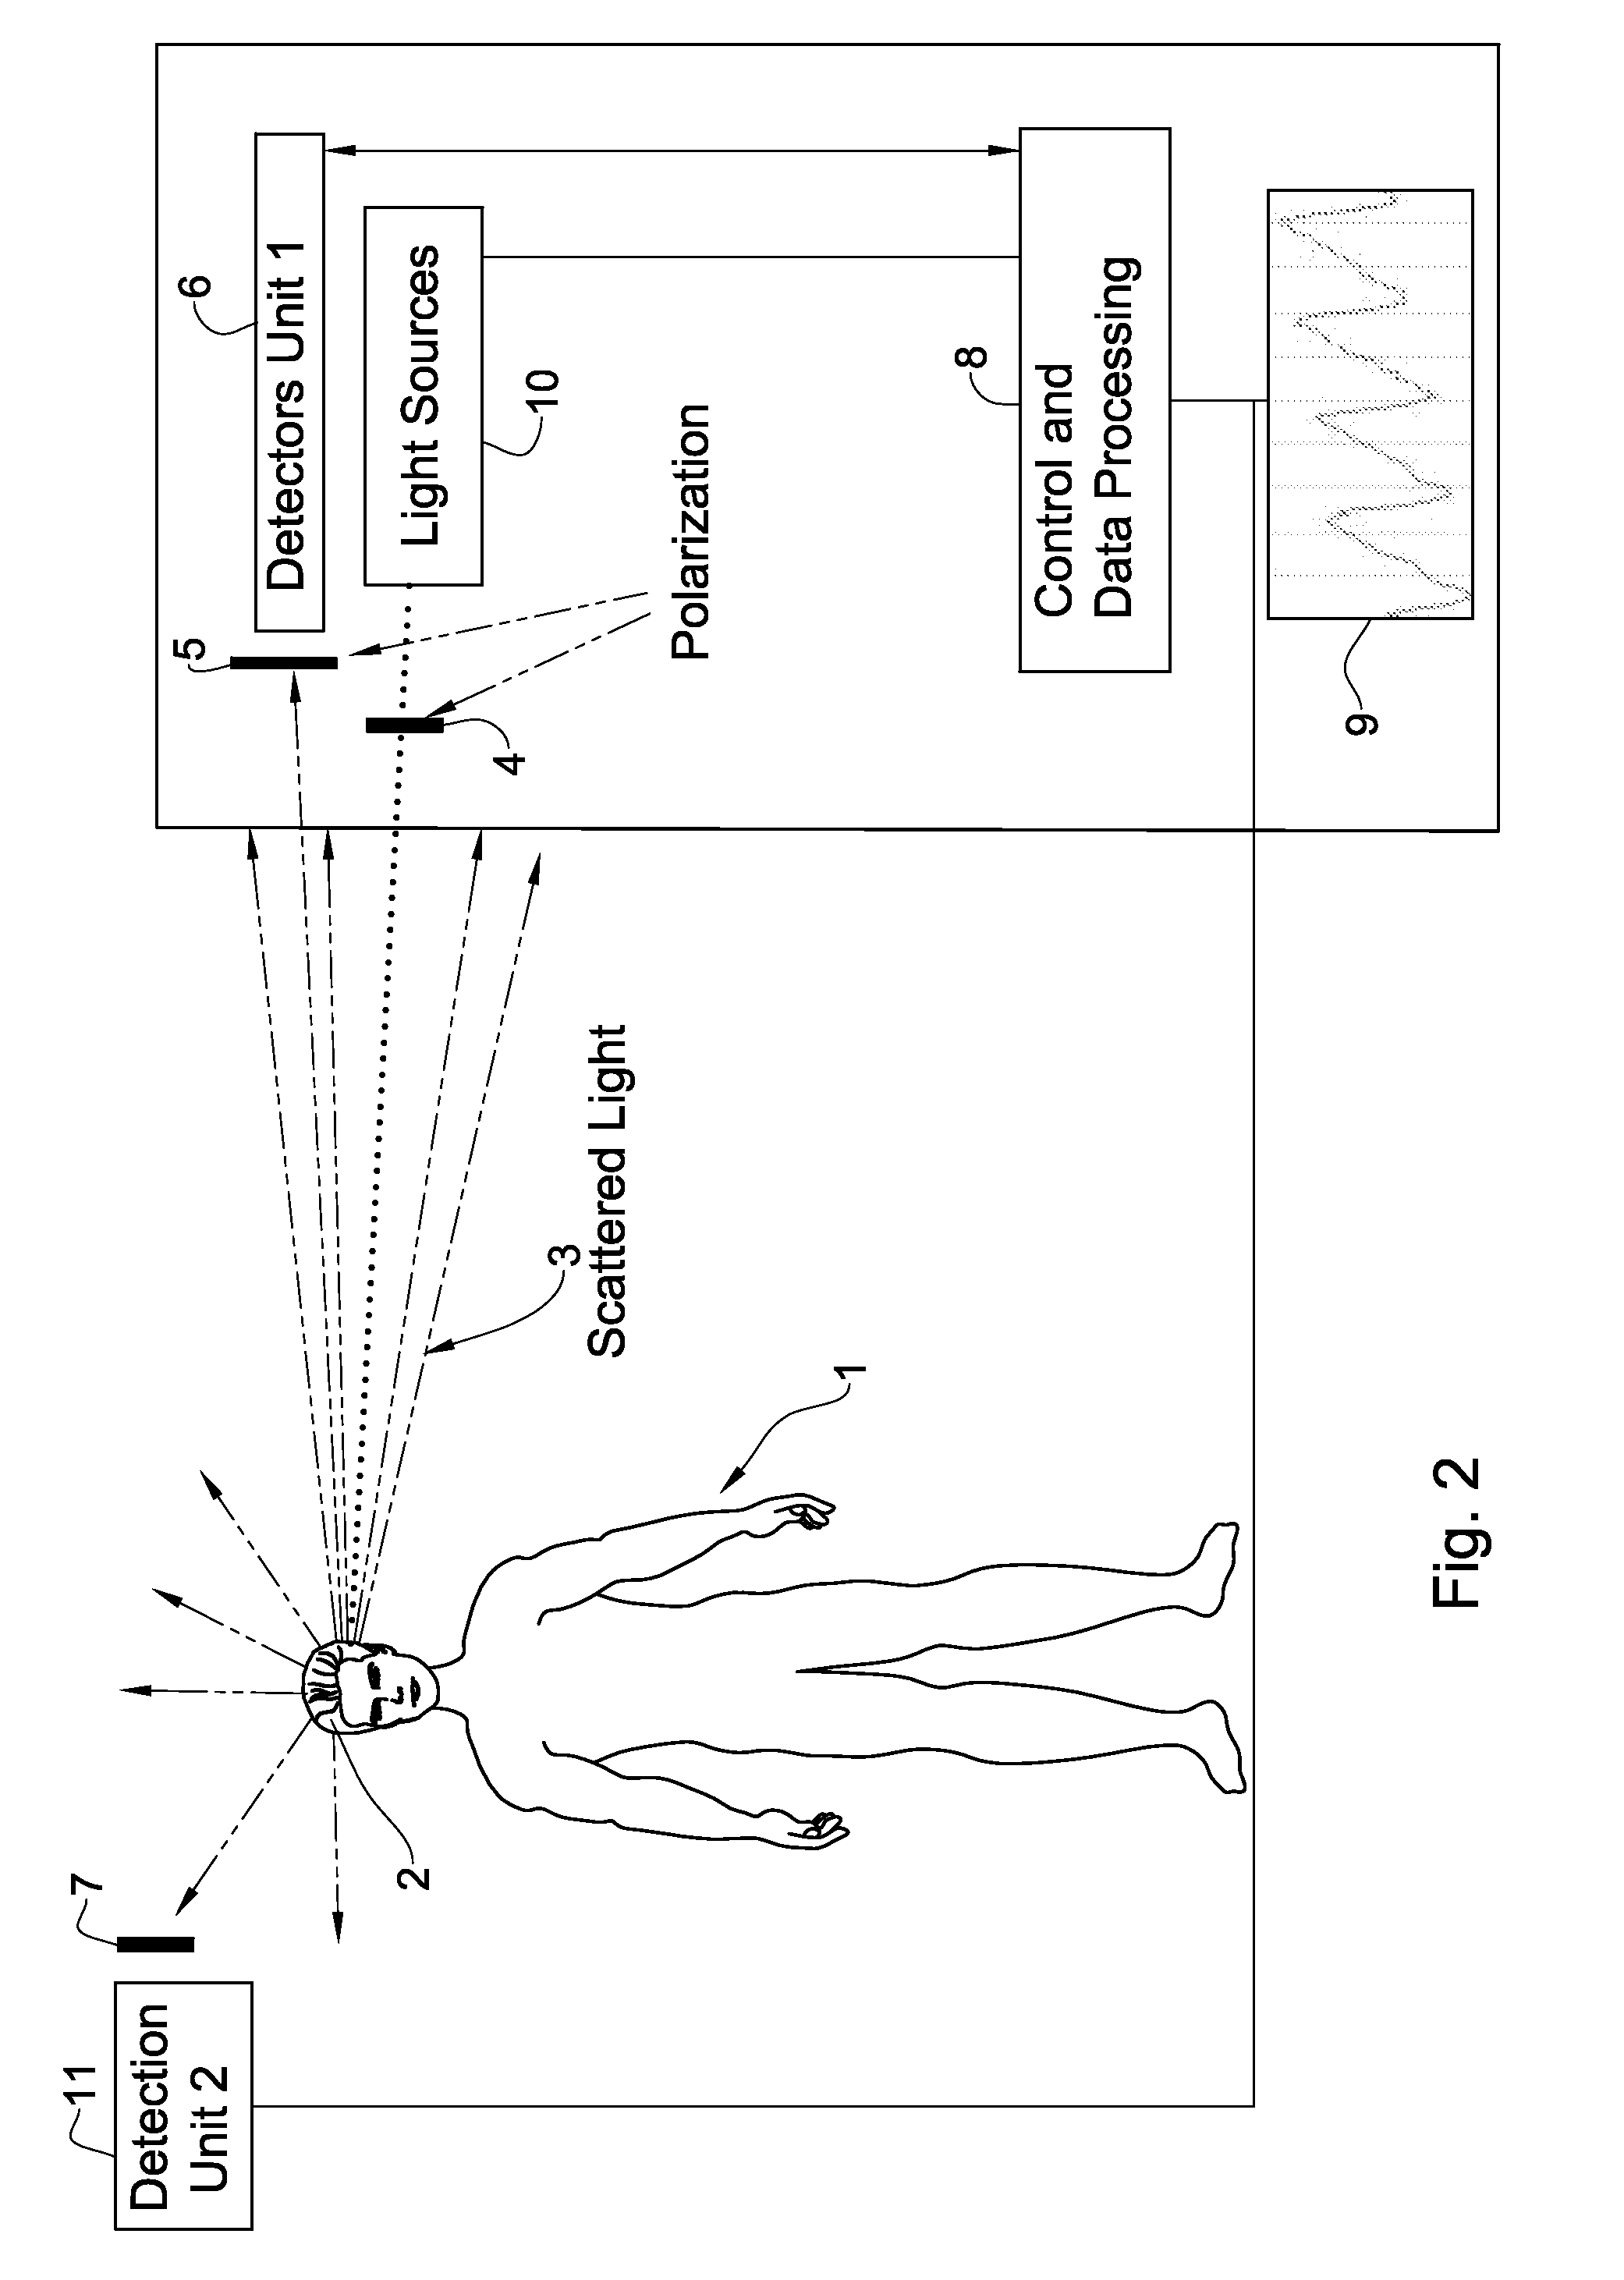 System and method for measurement of biological parameters of a subject